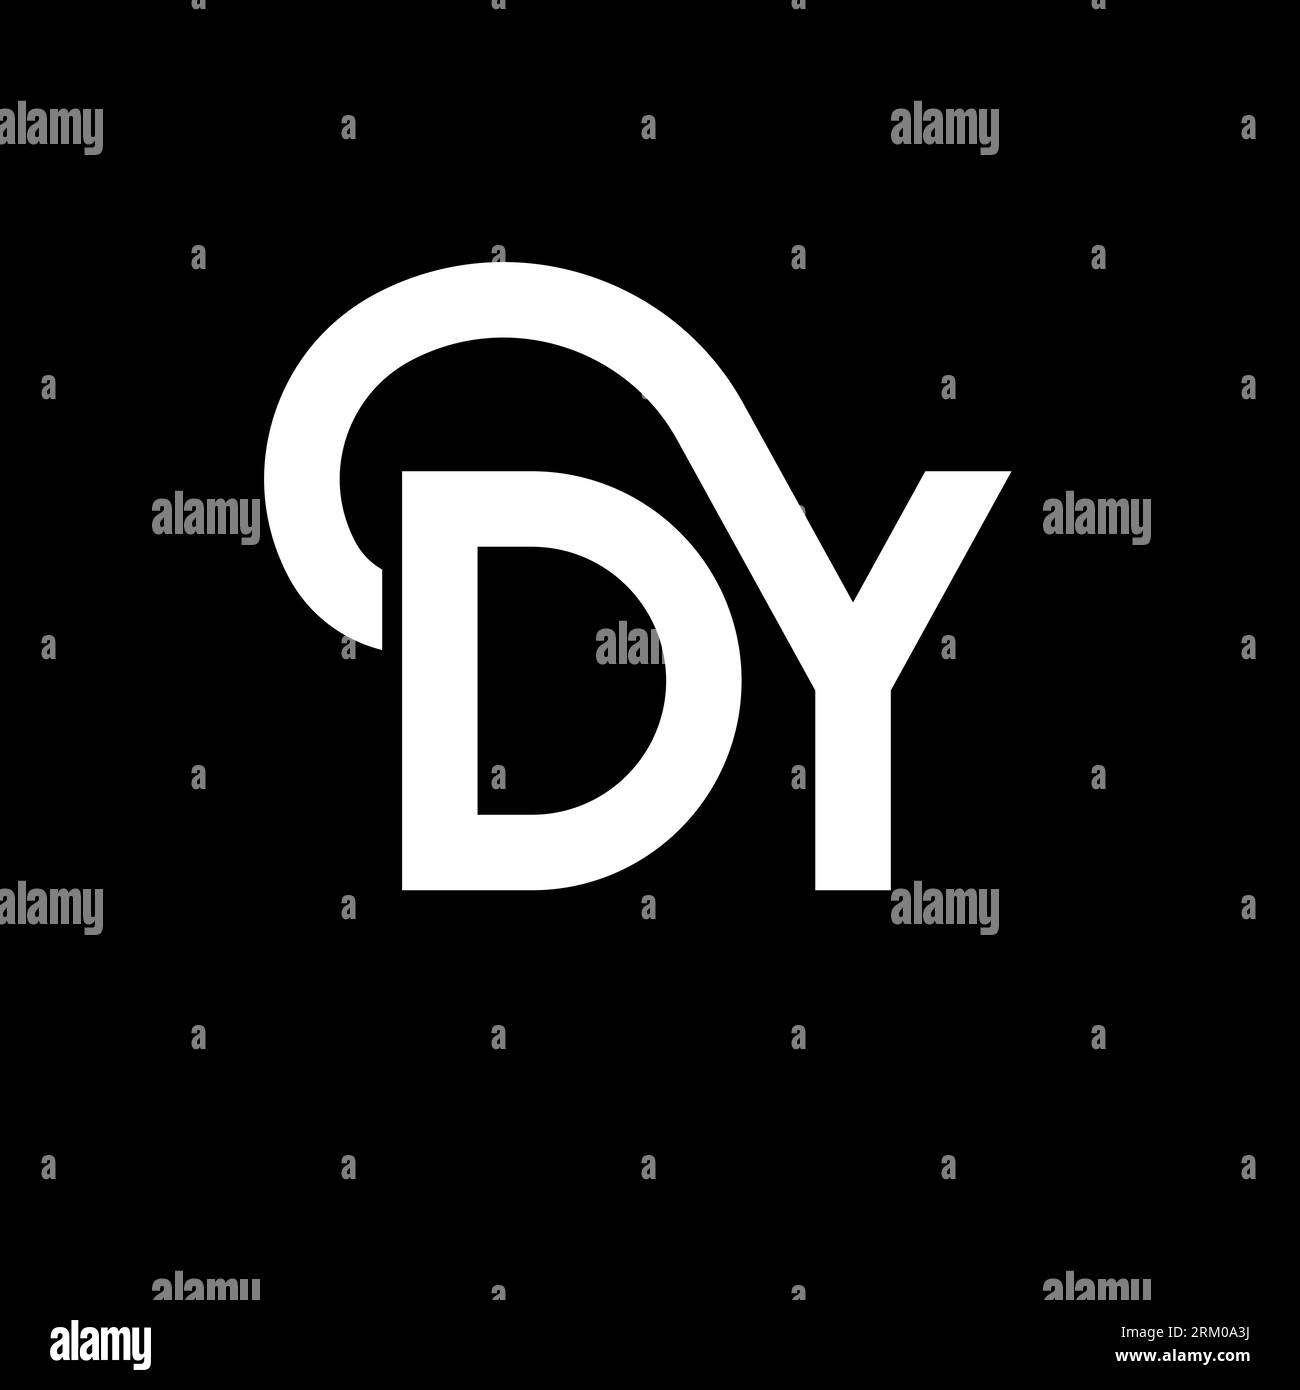 DY letter logo design on black background. DY creative initials letter logo concept. dy letter design. DY white letter design on black background. D Y Stock Vector